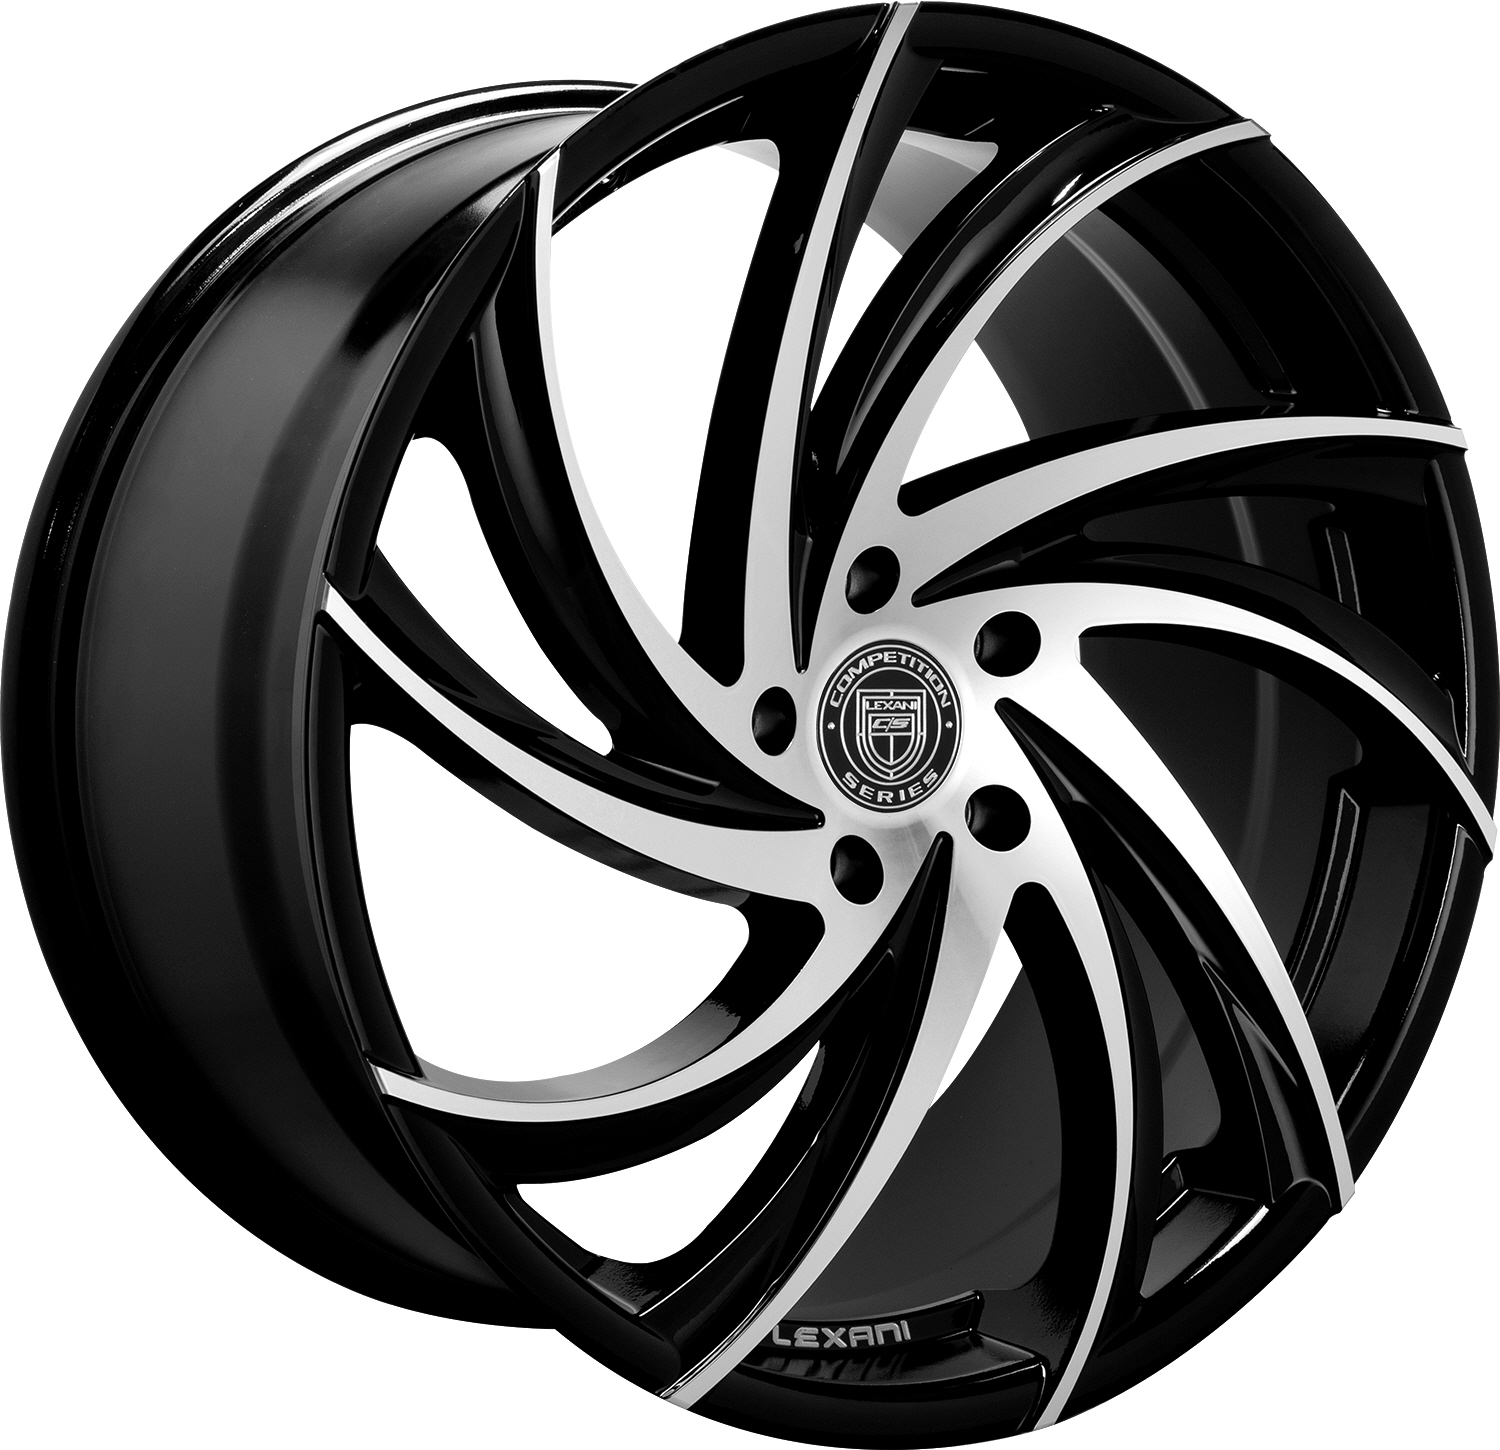 673 - TWISTER  WHEELS AND RIMS PACKAGES